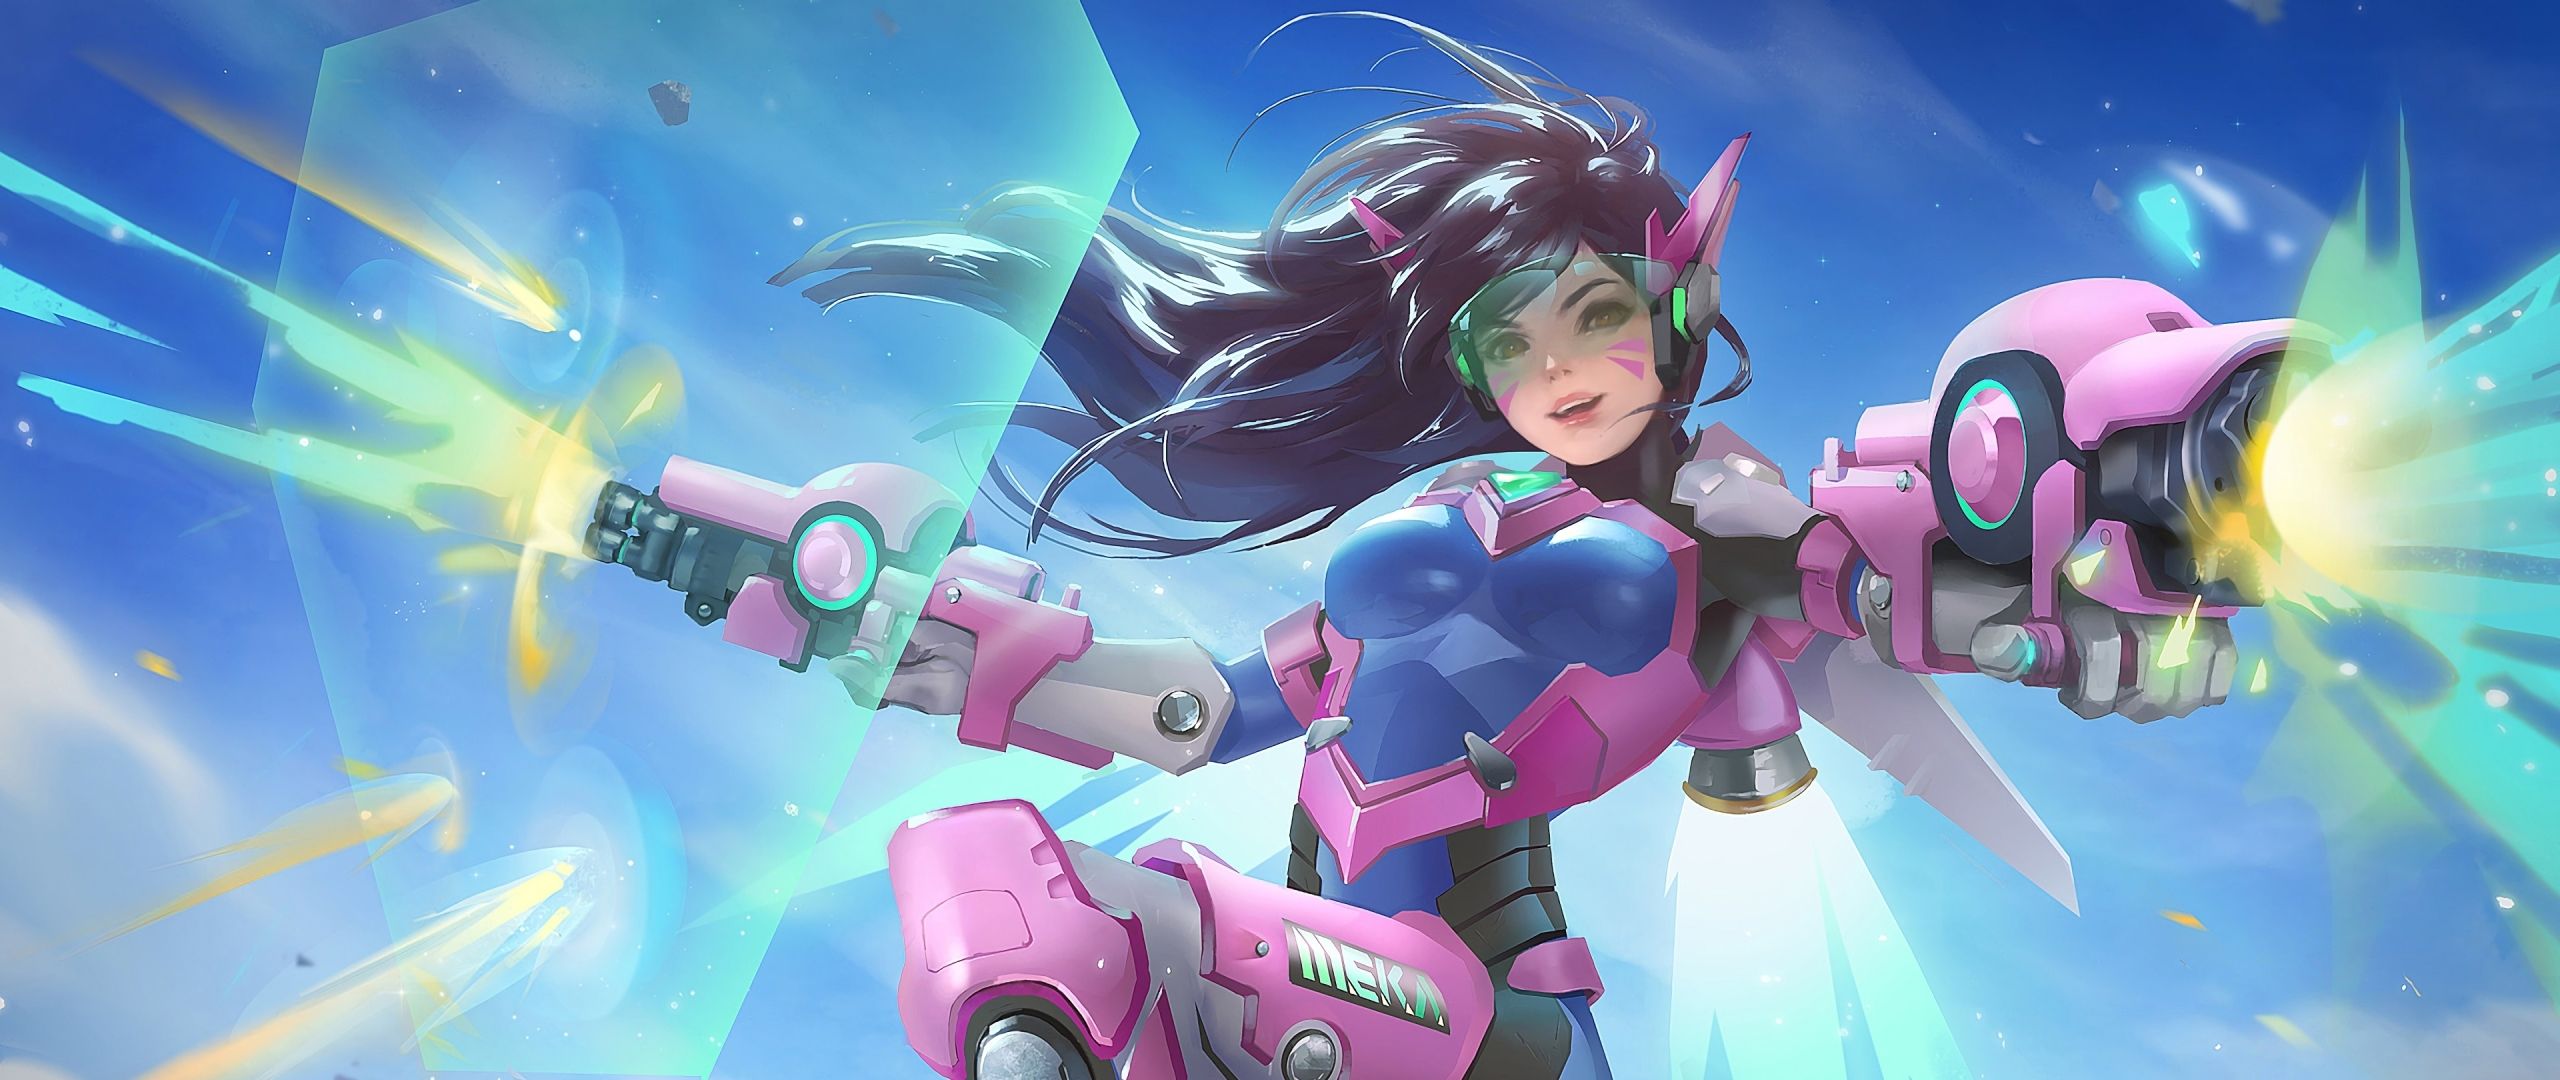 D.Va Overwatch Game 2560x1080 Resolution Wallpaper, HD Games 4K Wallpaper, Image, Photo and Background